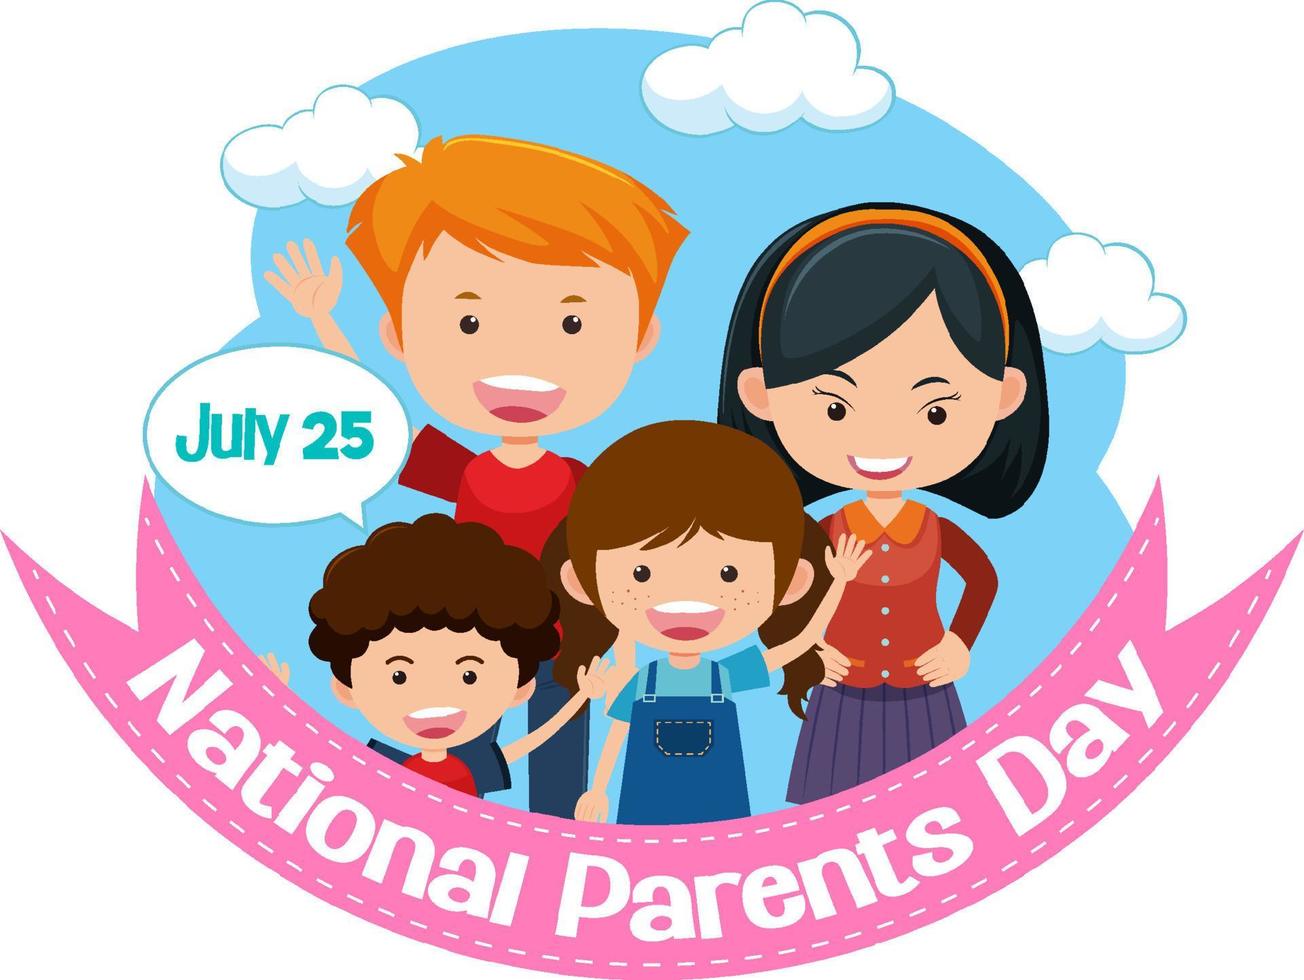 National Parents Day Poster Template vector